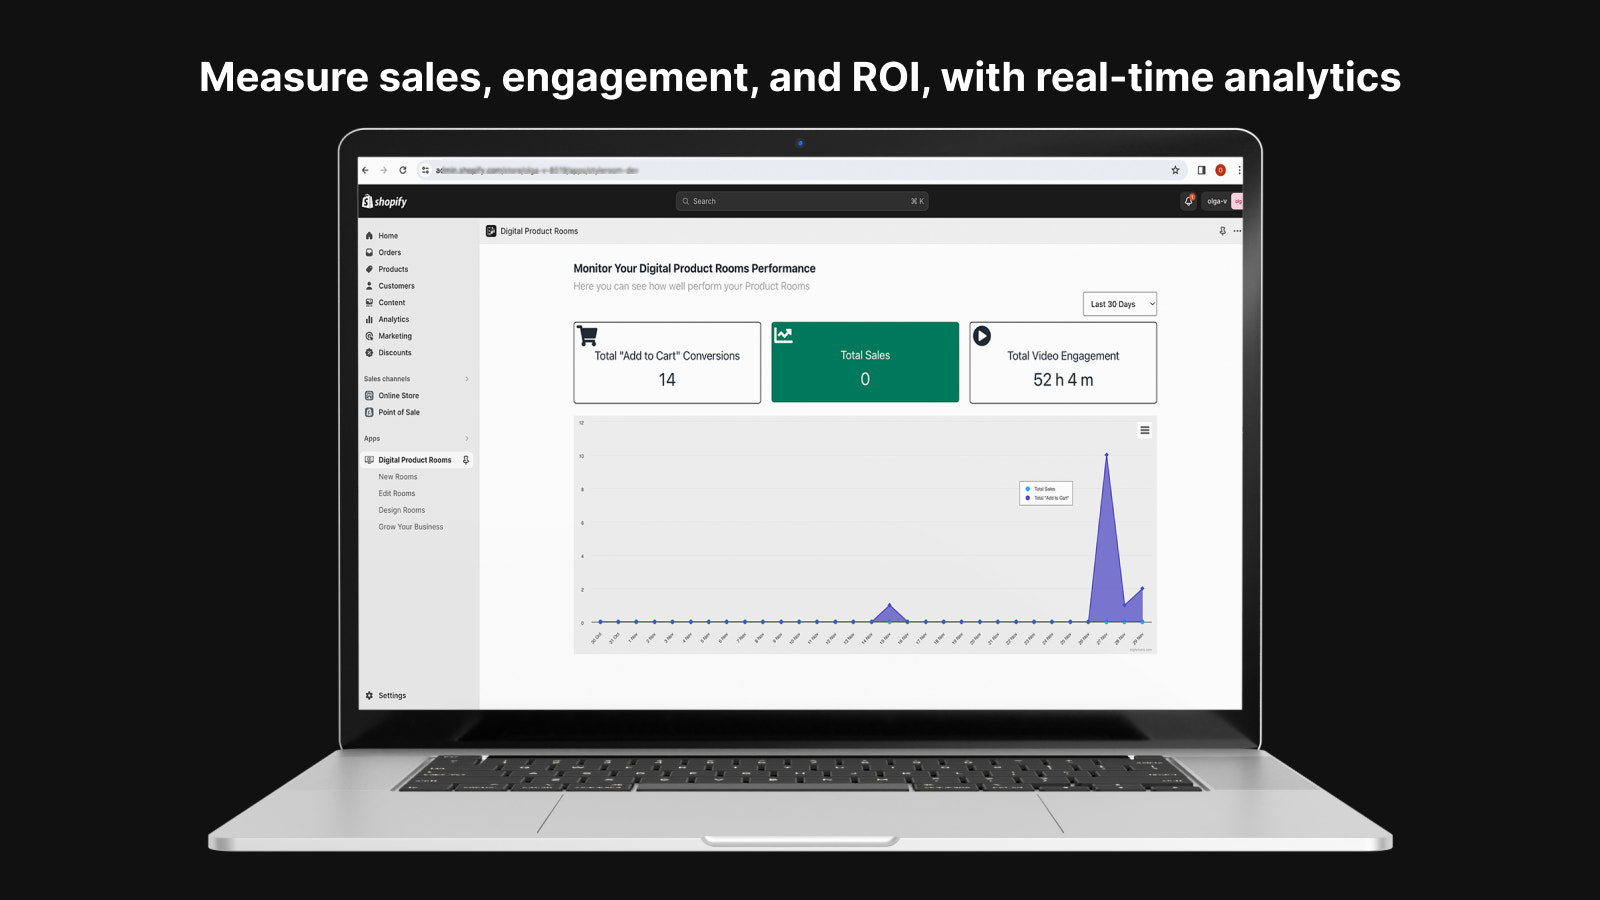 Measure sales, engagement, and ROI, with real-time analytics